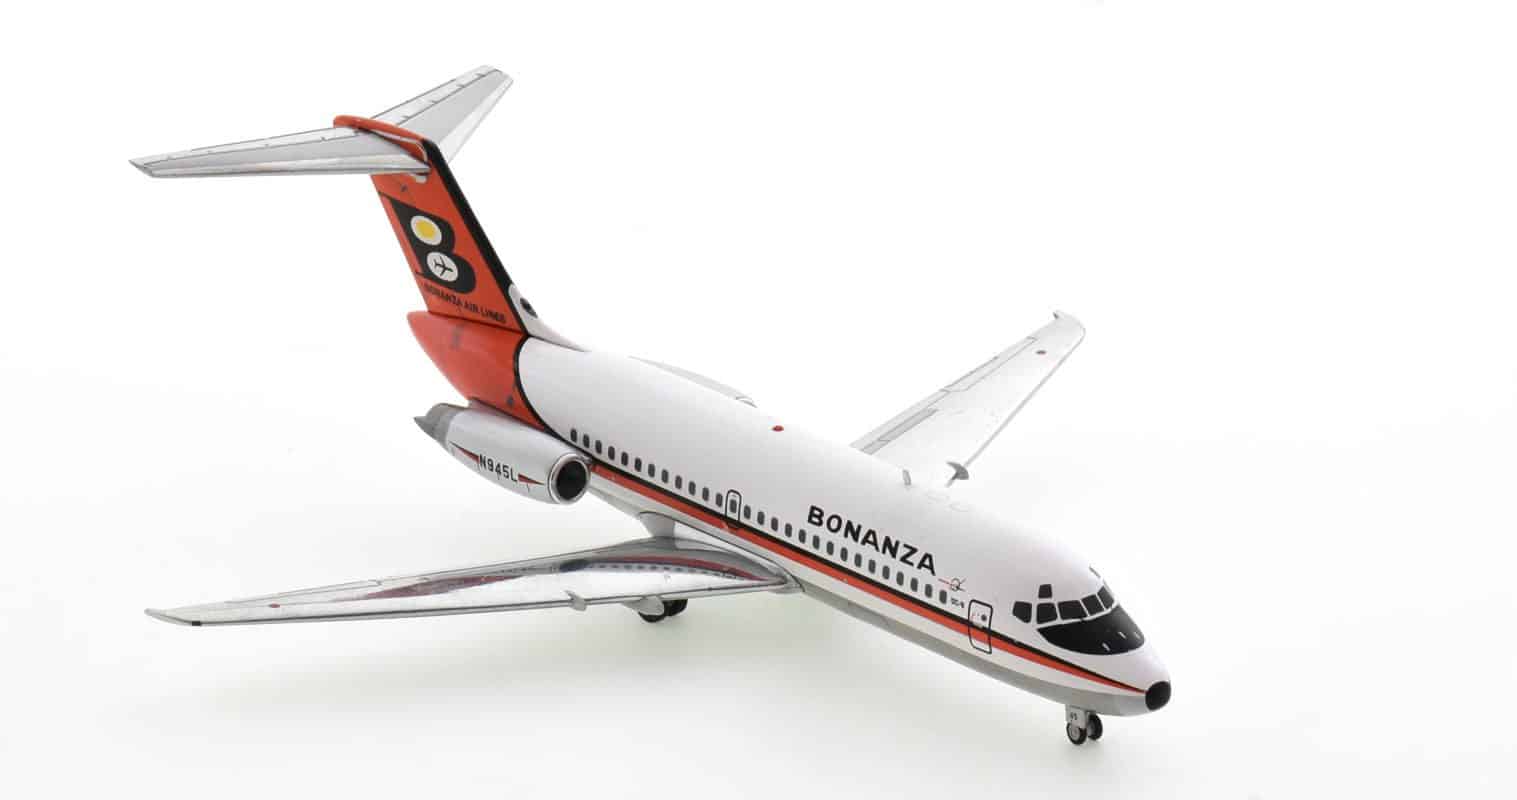 Front starboard side view of Gemini Jets G2BZA480 - 1/200 scale diecast model of the McDonnell Douglas DC-9-11 registration N945L in Bonanza Airlines livery.